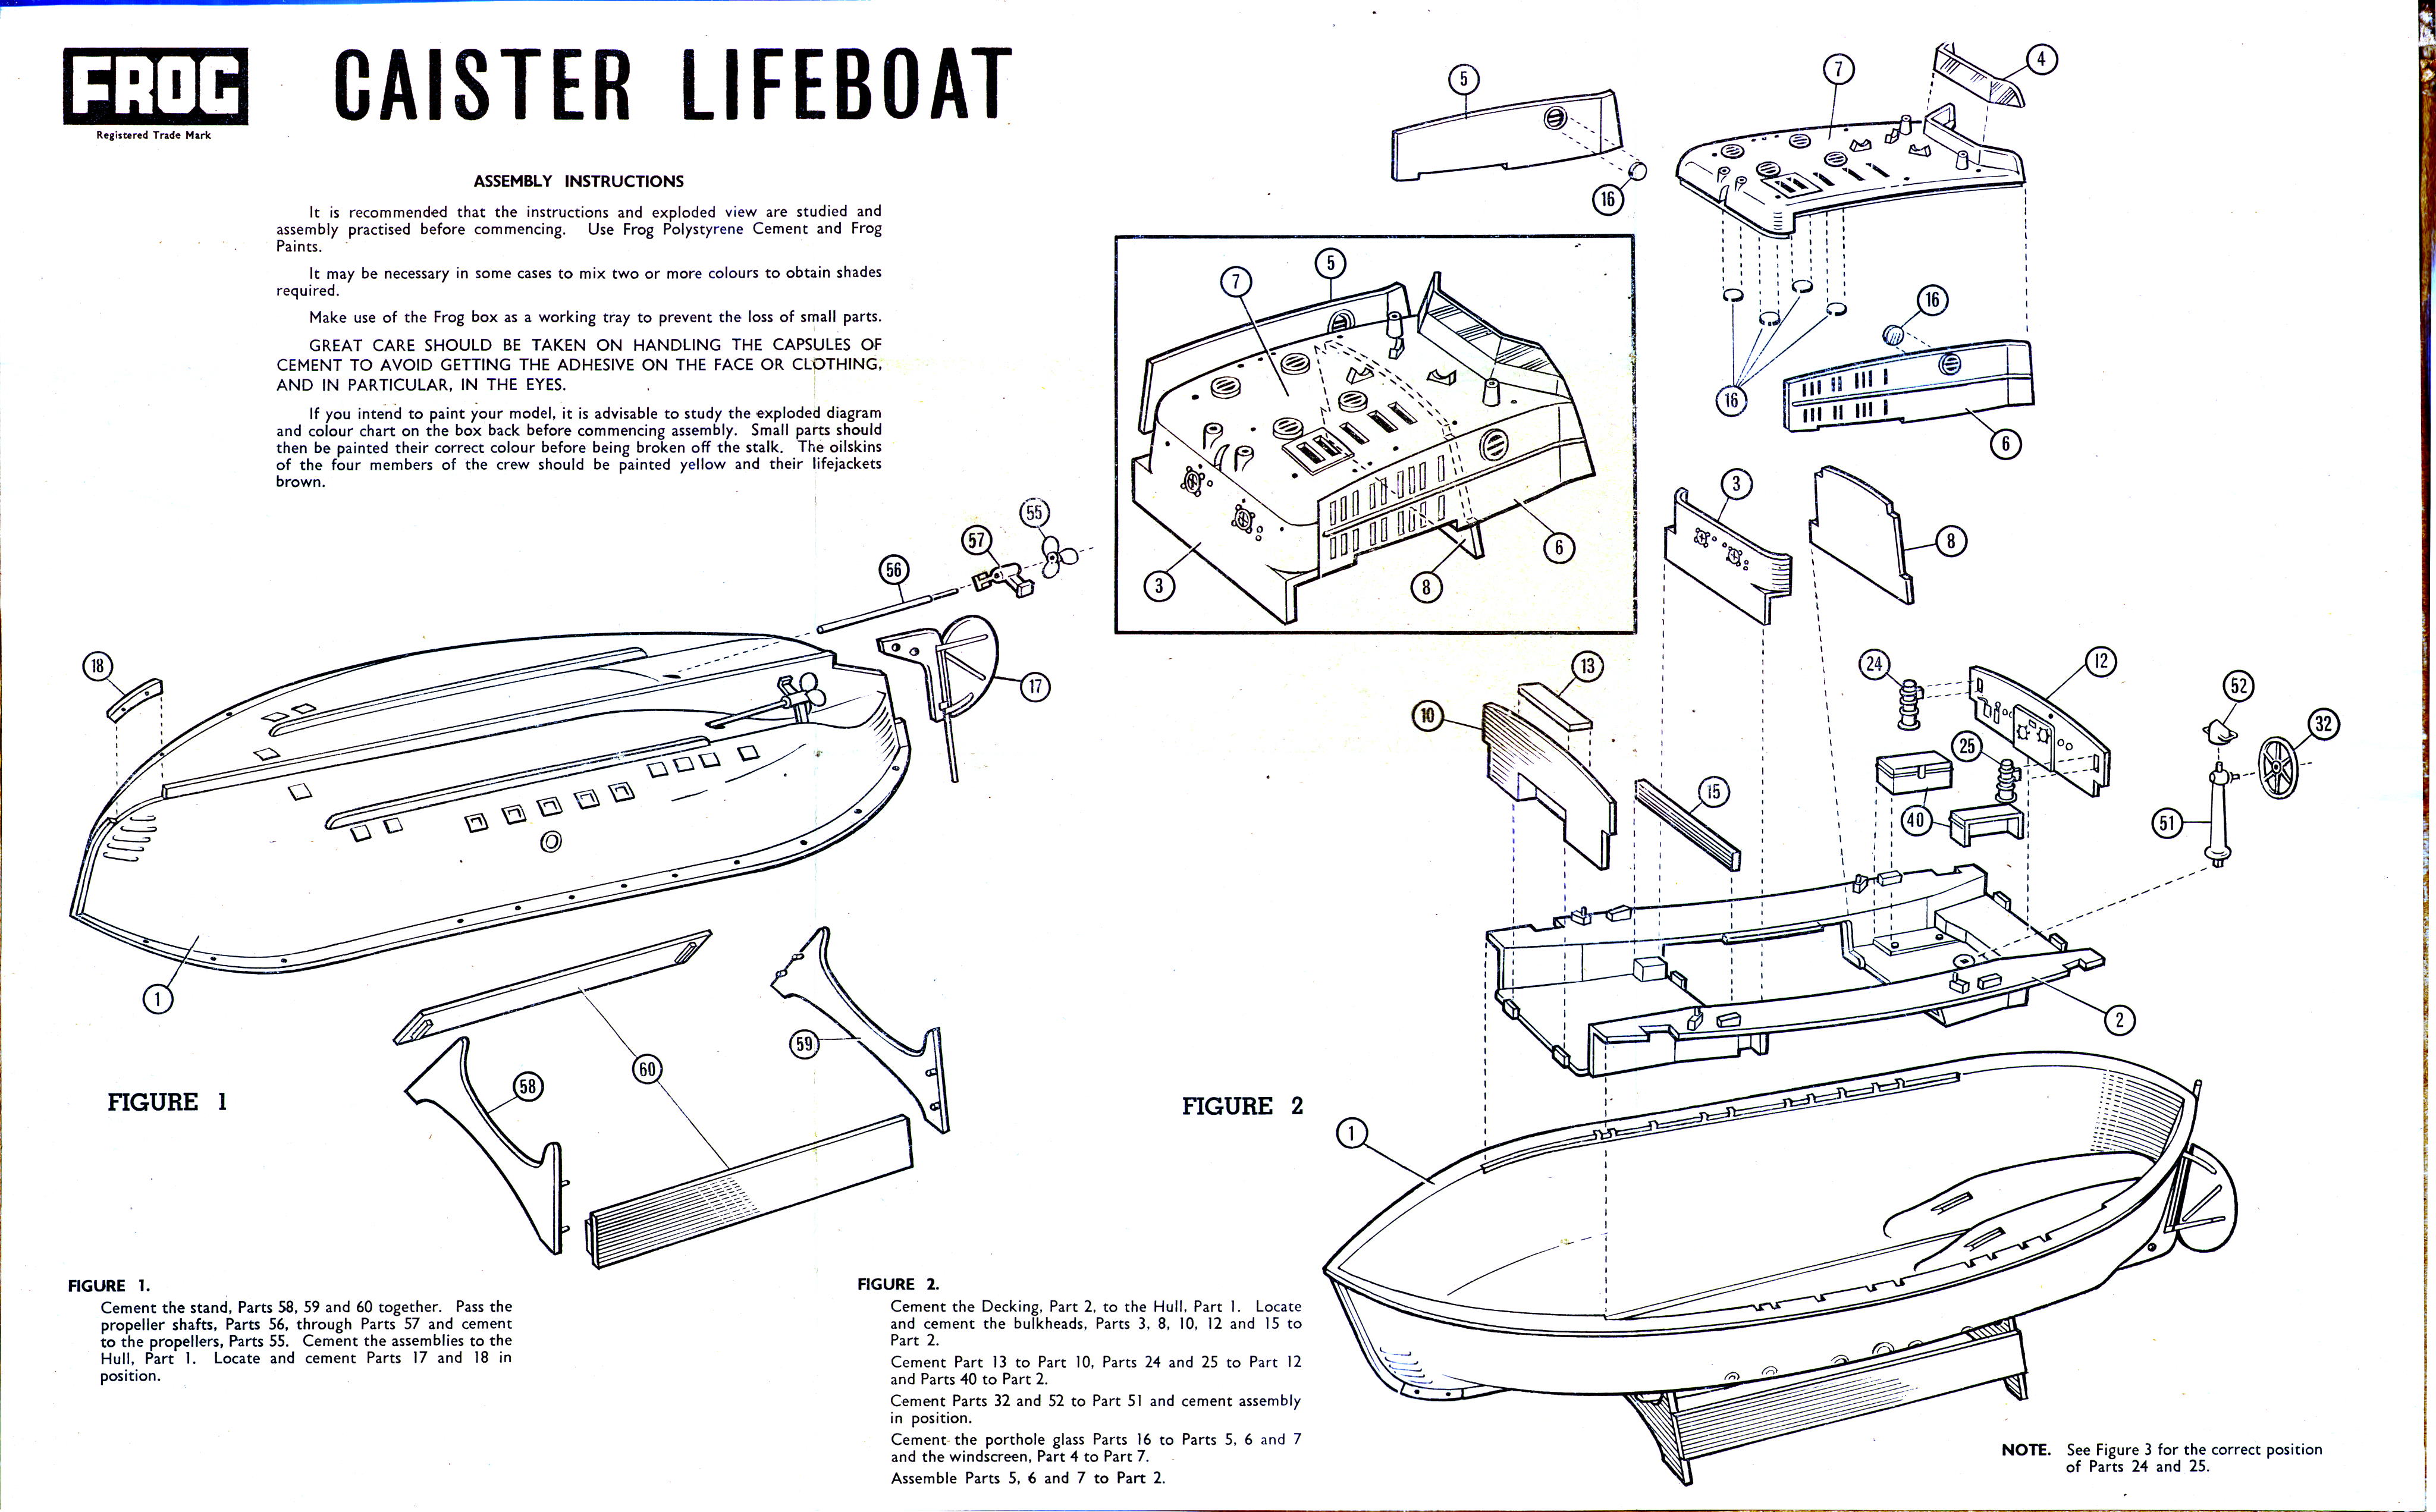 FROG F129 North Sea Lifeboat 37ft. Oakley self-rightning type RNLI lifeboat, Rovex, 1967, assembly instructions list 1